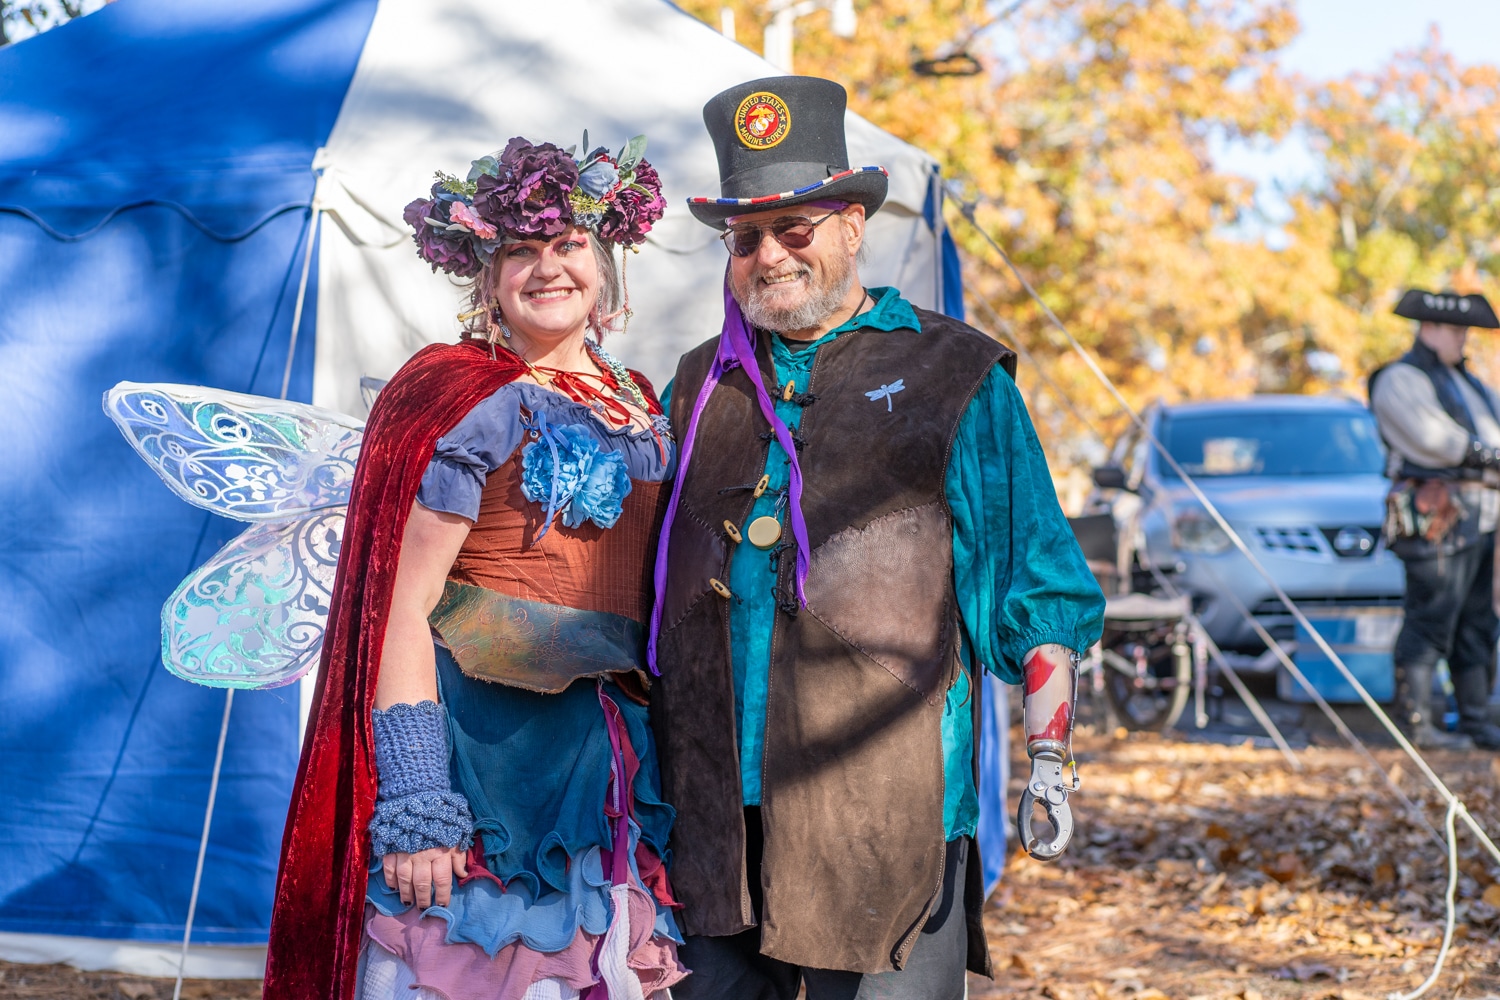 A woman dressed as a flower fairy and a man with a top hat smile for the camera in front of a tent at the Arkansas Renaissance Festival.